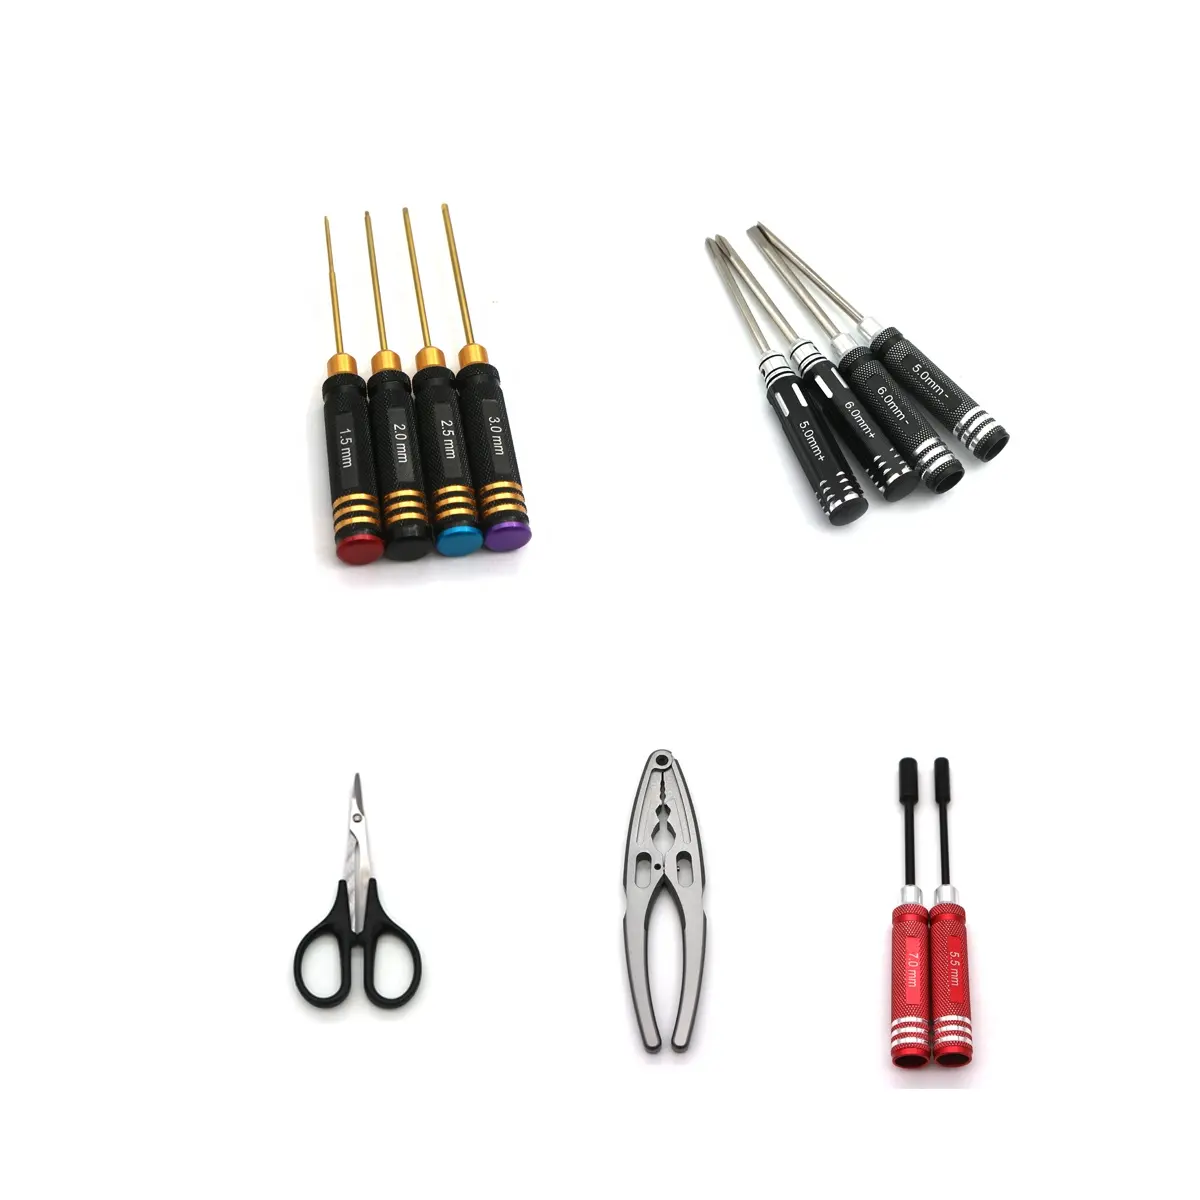 RC Tools Hex Screw Driver Set Alloy/Titanium Plating Hardened Screwdriver Repair DIY For Helicopter Quadcopter Aircraft Car Boat